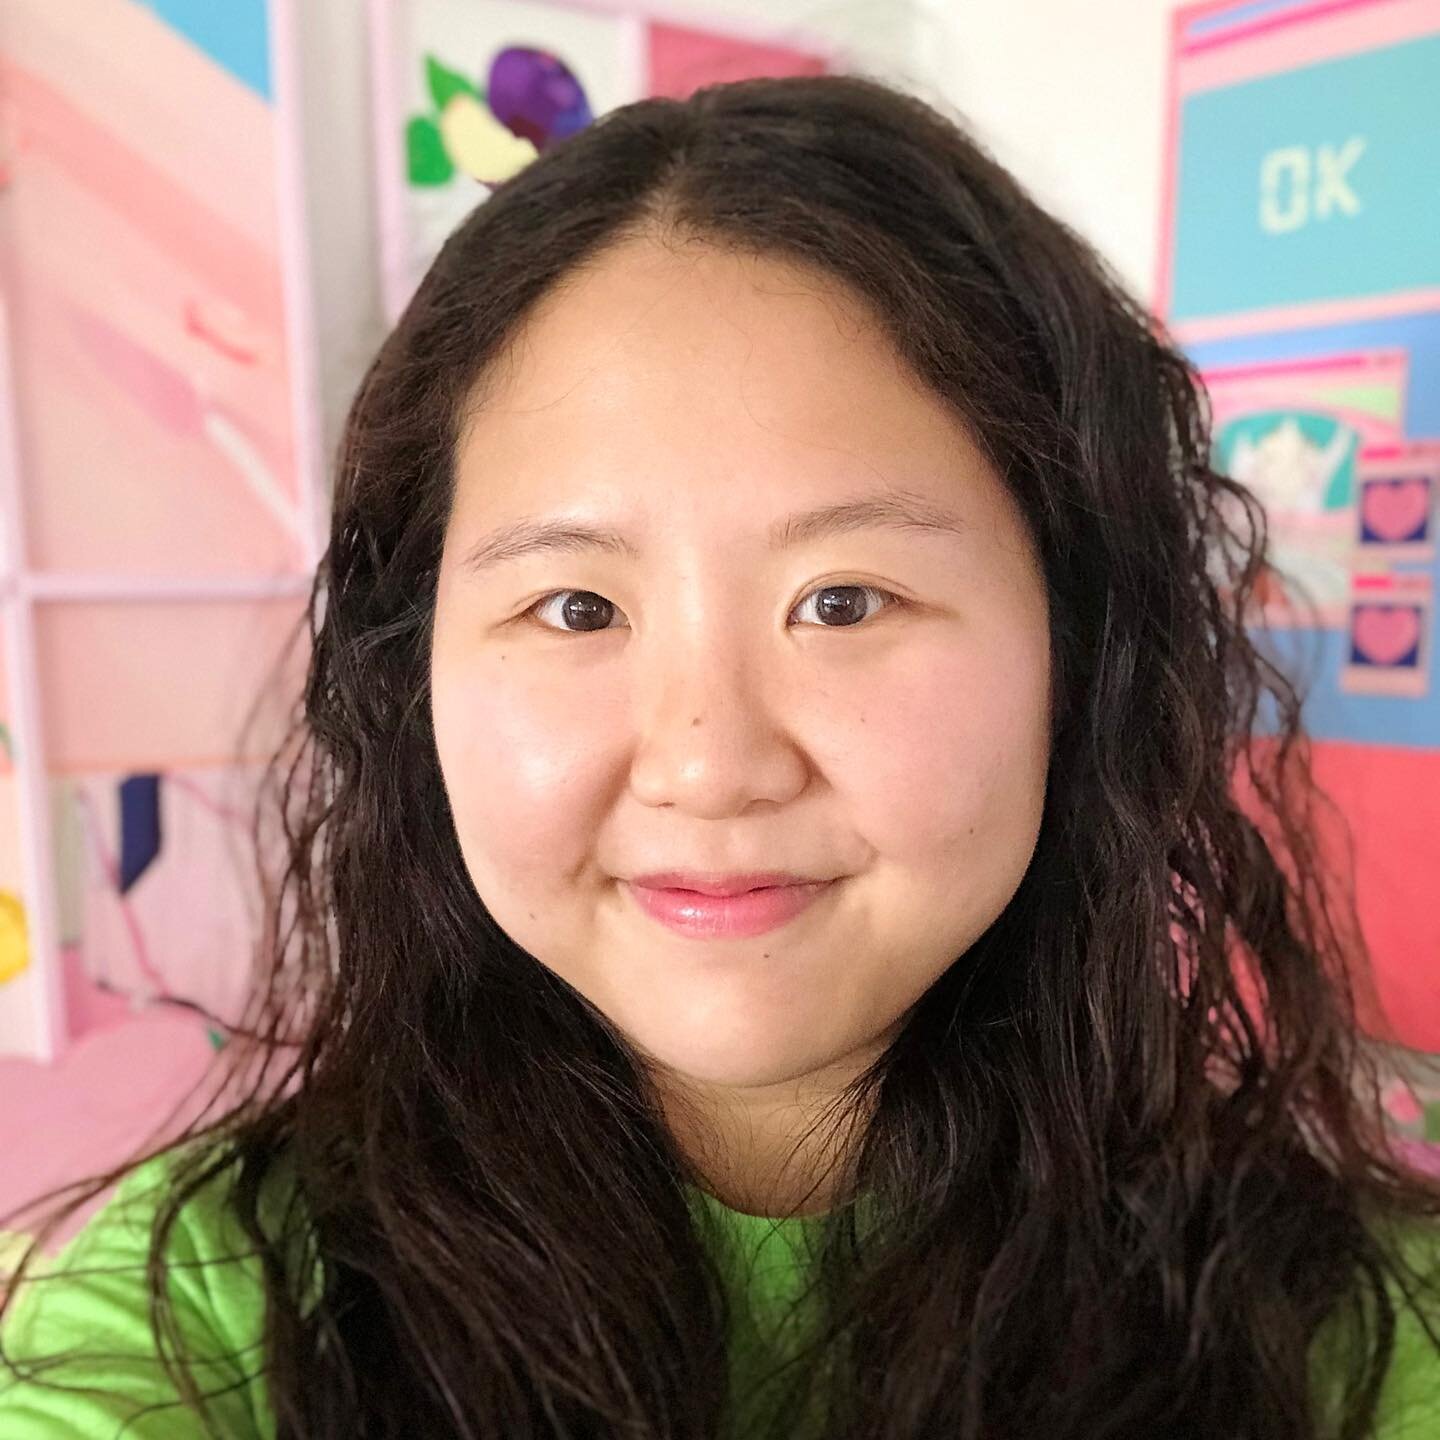 🎉It was magical to talk to the artist Christina Yuna Ko @christina_yuna_ko for Mint Tea&rsquo;s twenty-fifth interview🎉

Christina Yuna Ko is a Korean American artist living and working in Queens, NY. She received her BFA from Cornell University in